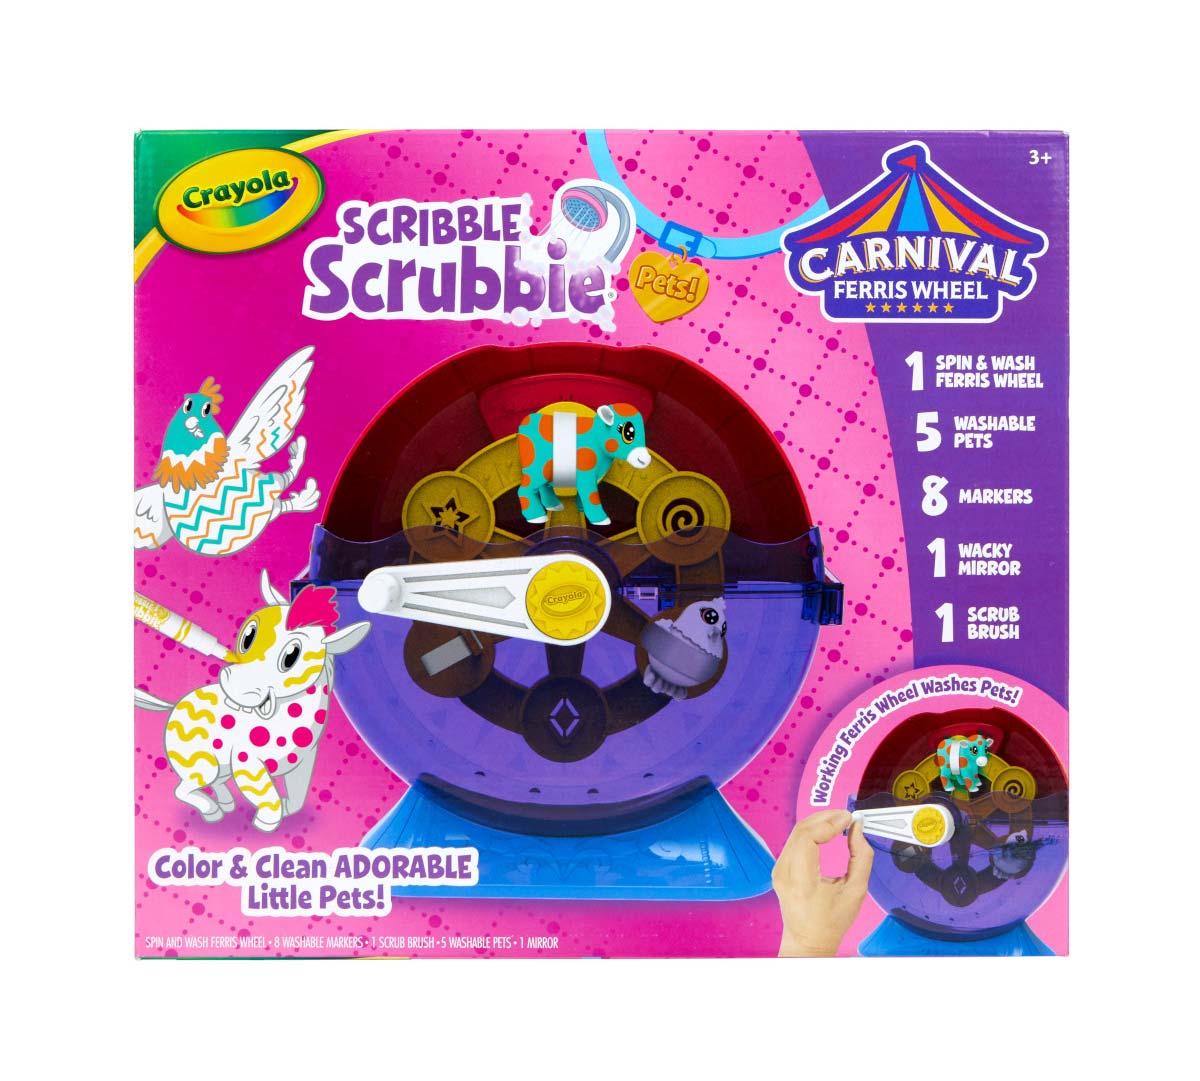 Crayola Washimals, Pet Playset, Creative Gift for Kids, Ages 3, 4, 5, 6 :  : Toys & Games